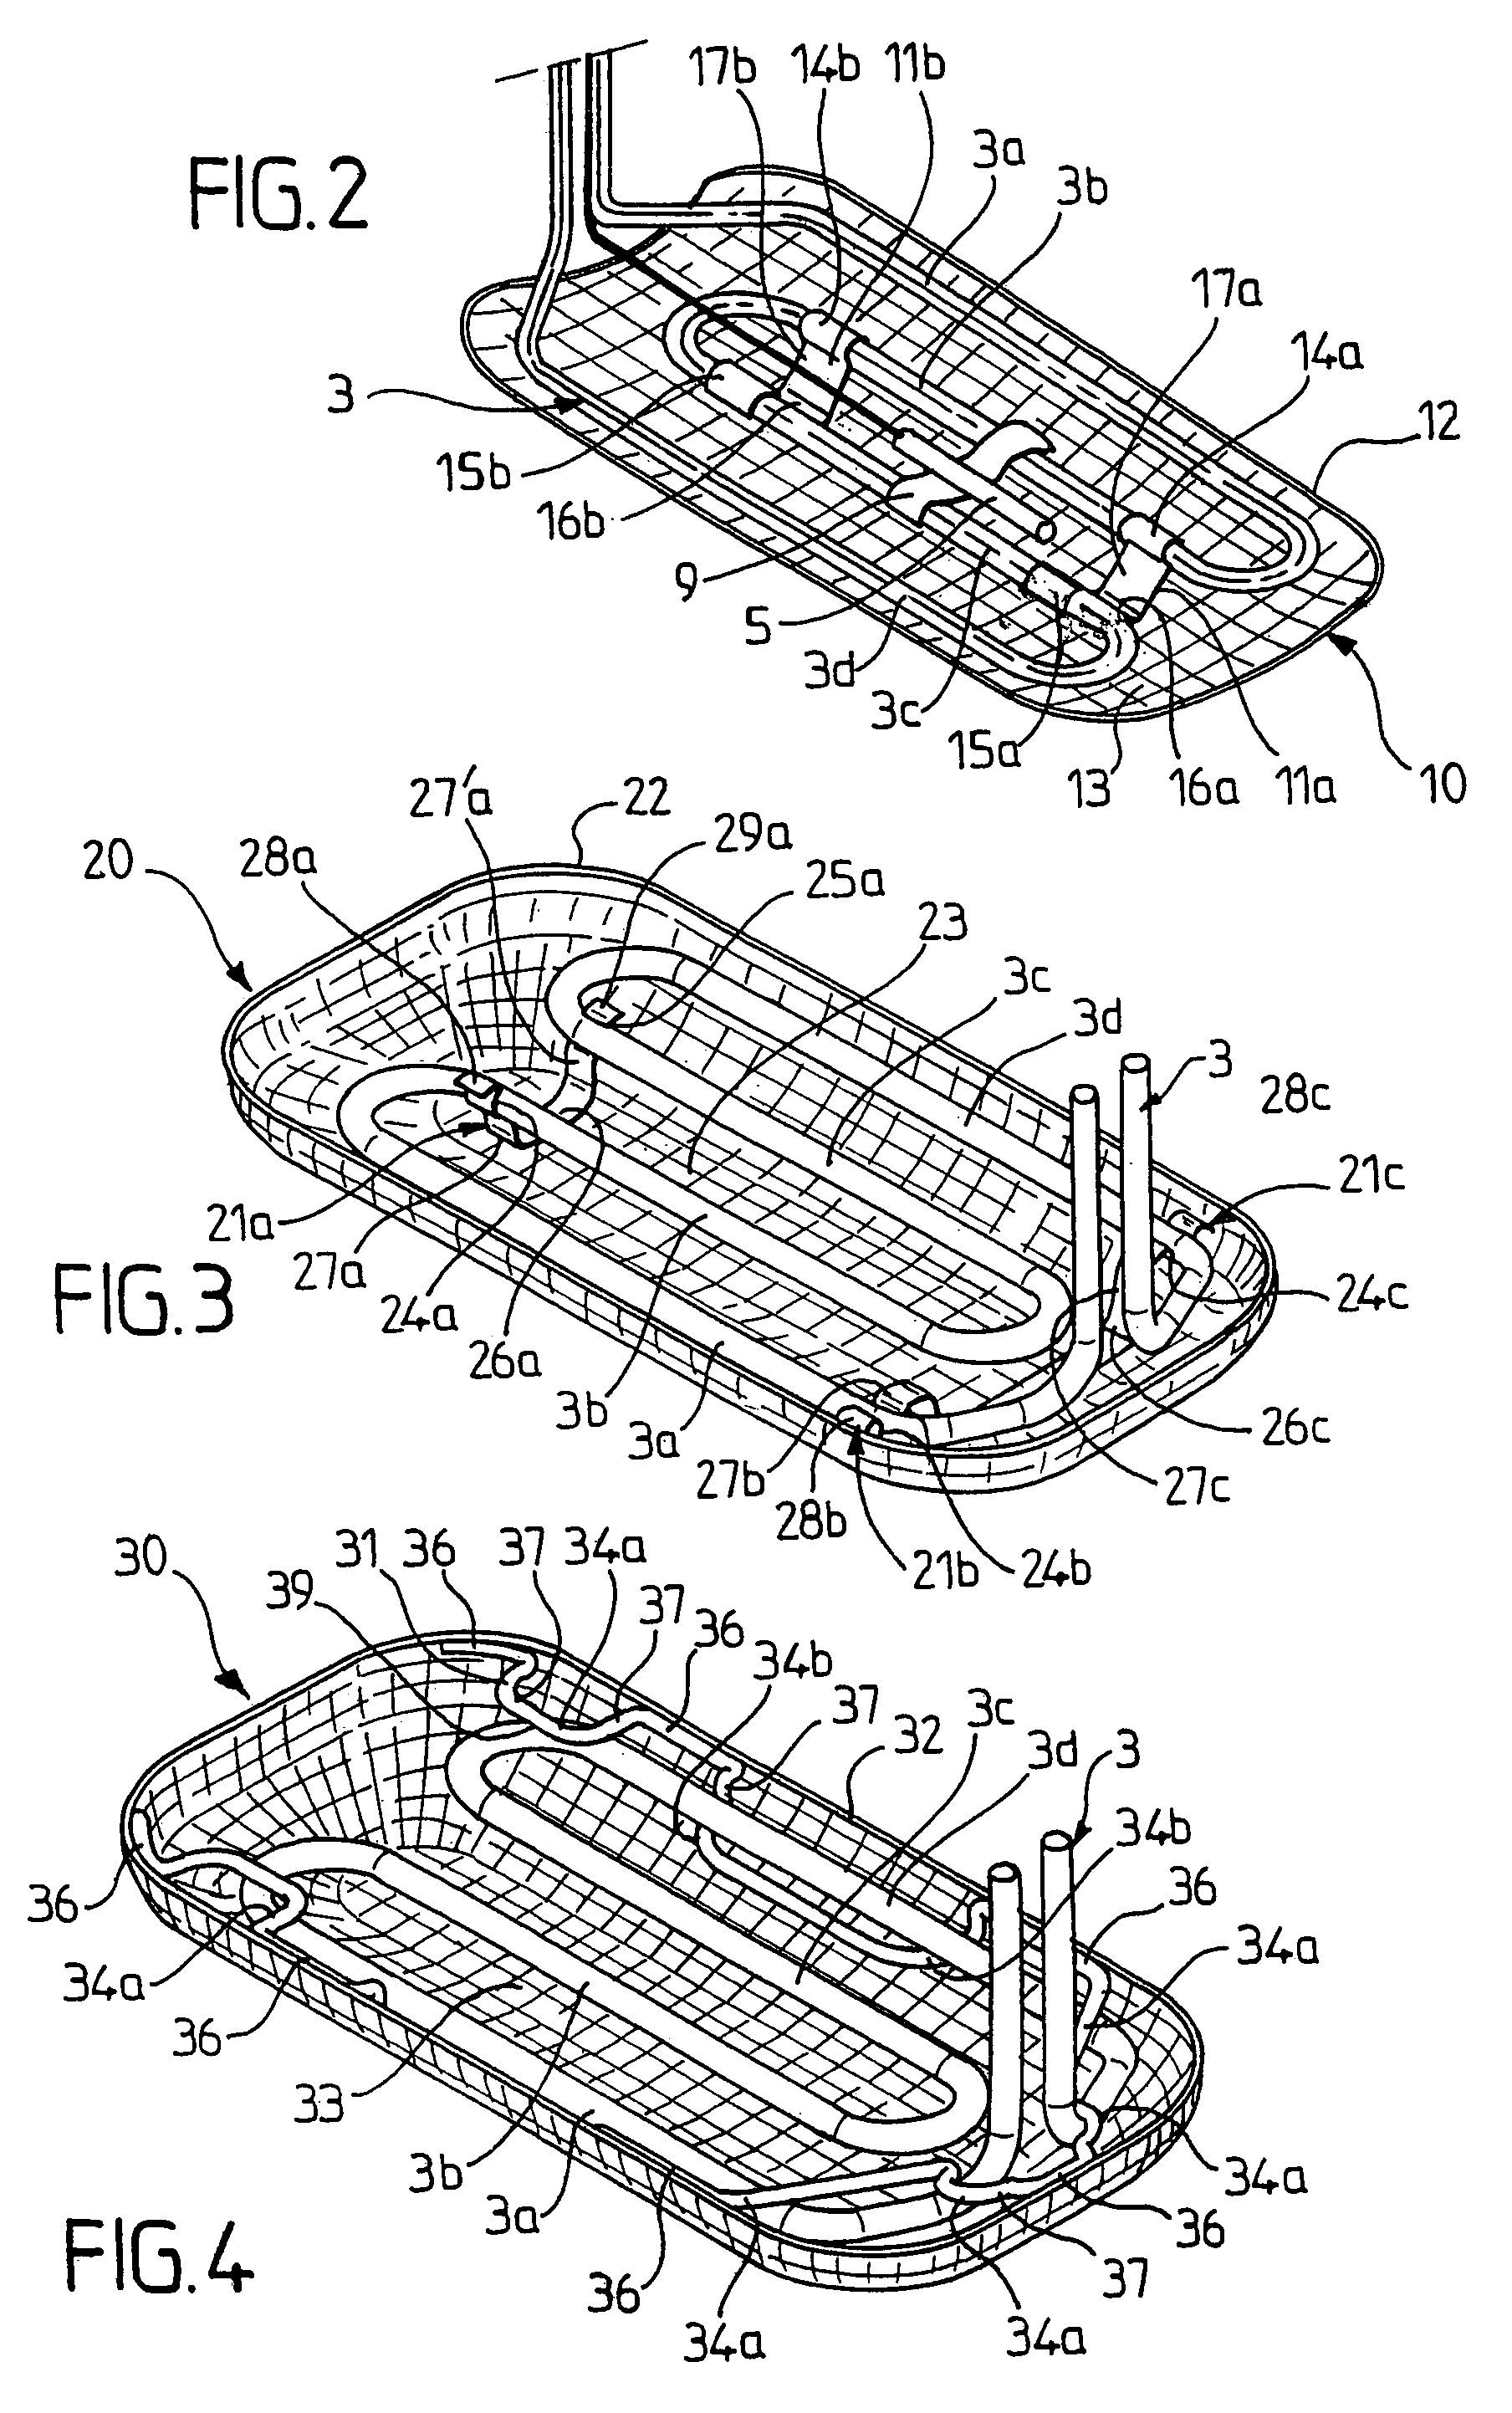 Device for filtration of the frying bath in an electric fryer having an immersed heating resistor